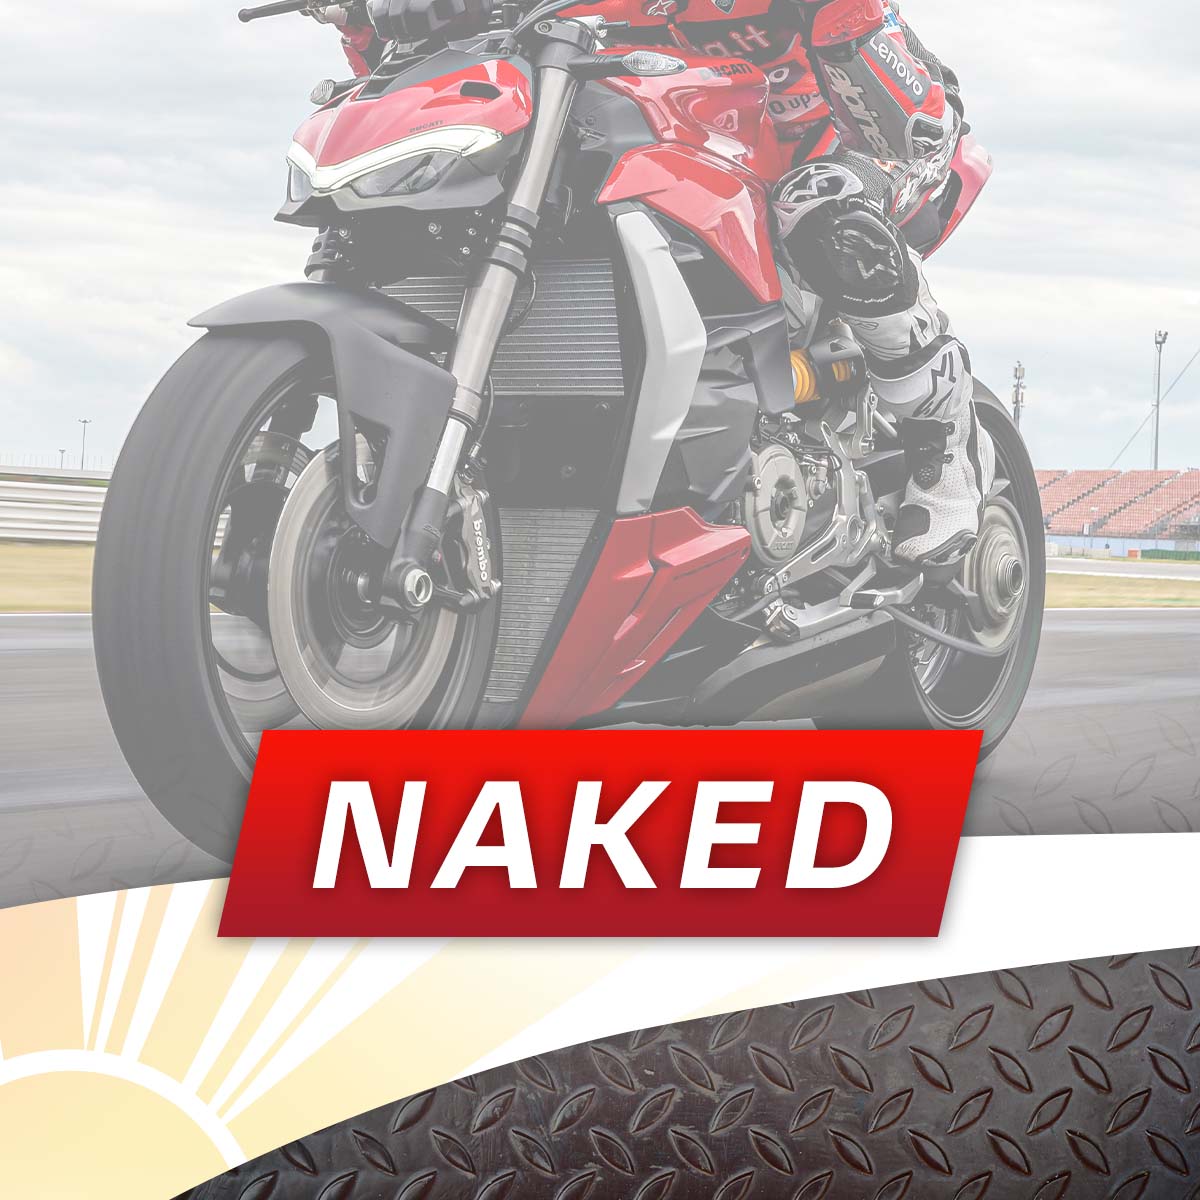 Join us at our Laguna Ducati Summer Celebration Event on Saturday 30th July and enter our Naked category for our Ducati bike competition!